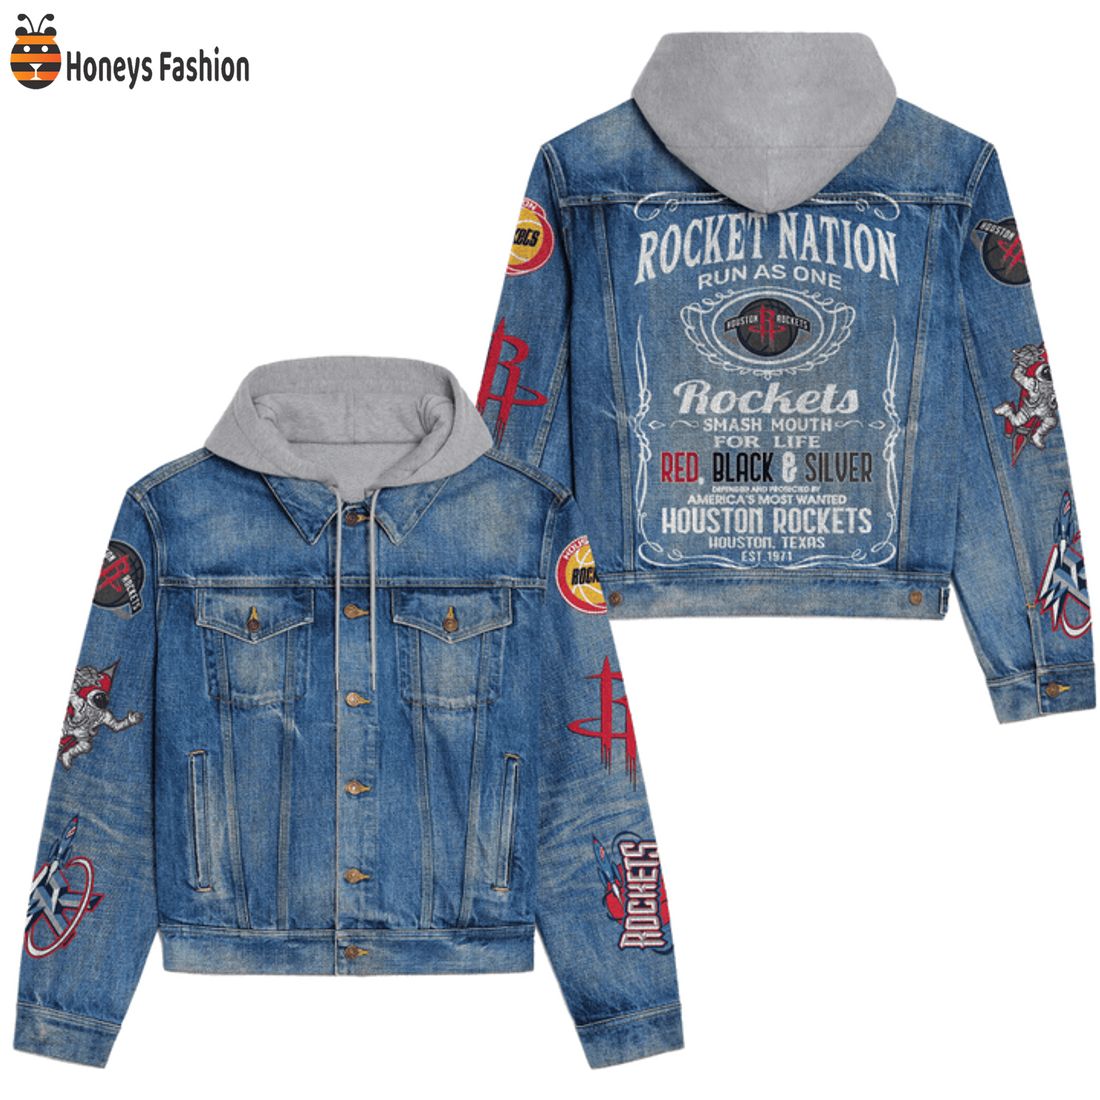 NEW Houston Rockets Nation Rus As One Smash Mouth Hooded Denim Jacket